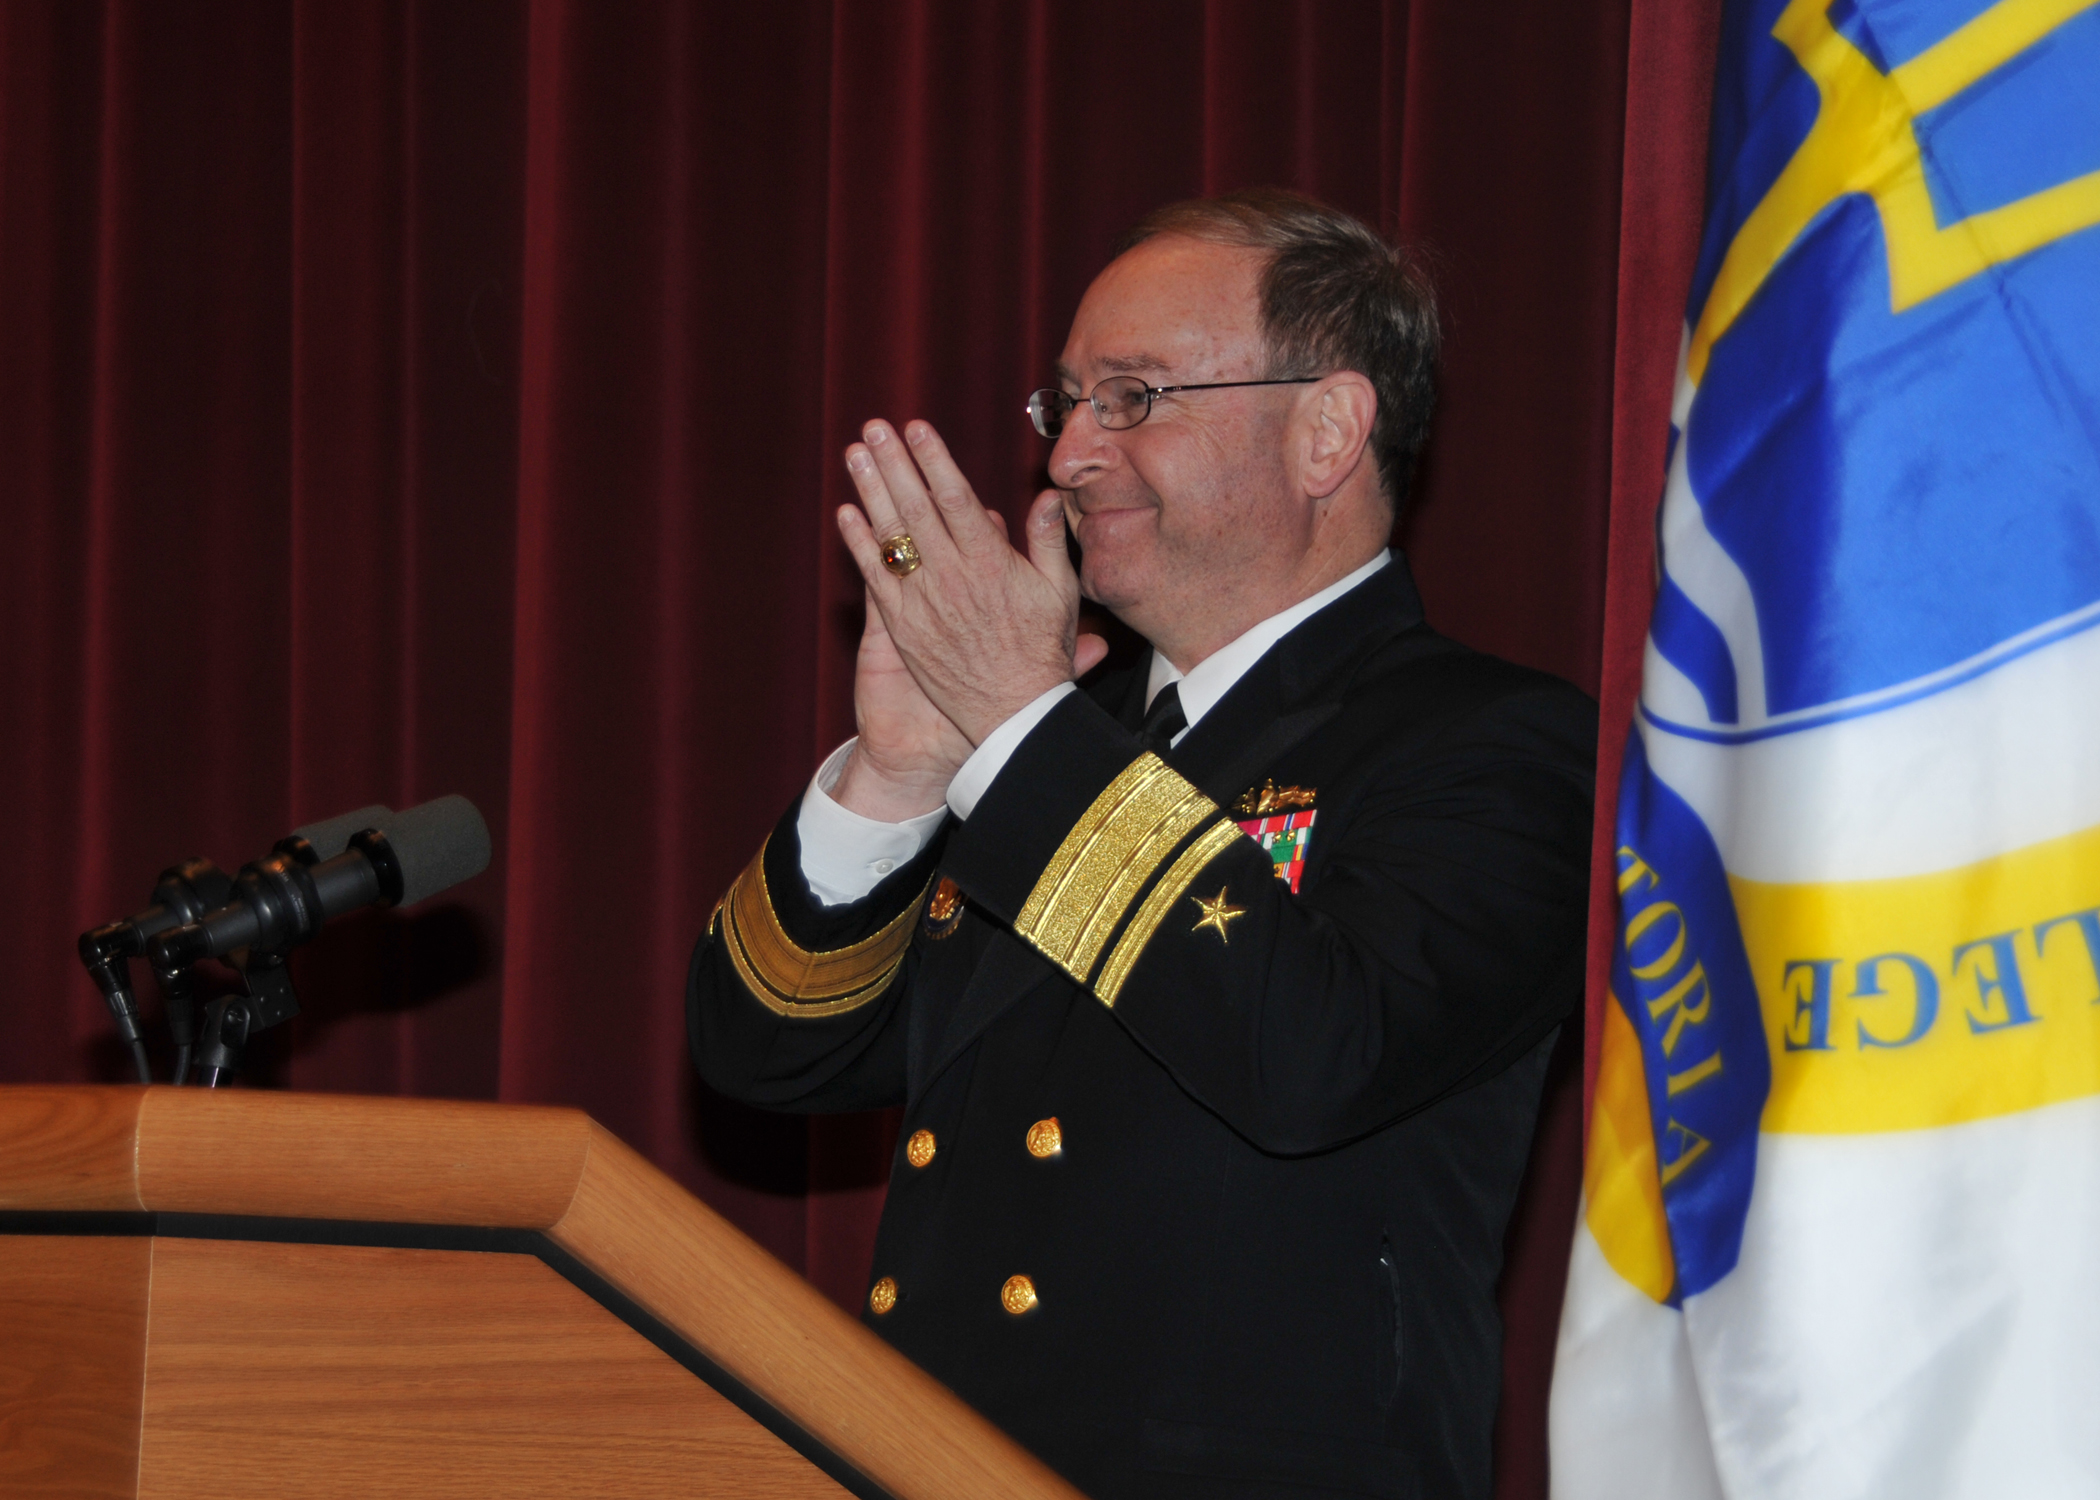 a man in military dress clothes clapping behind a podium